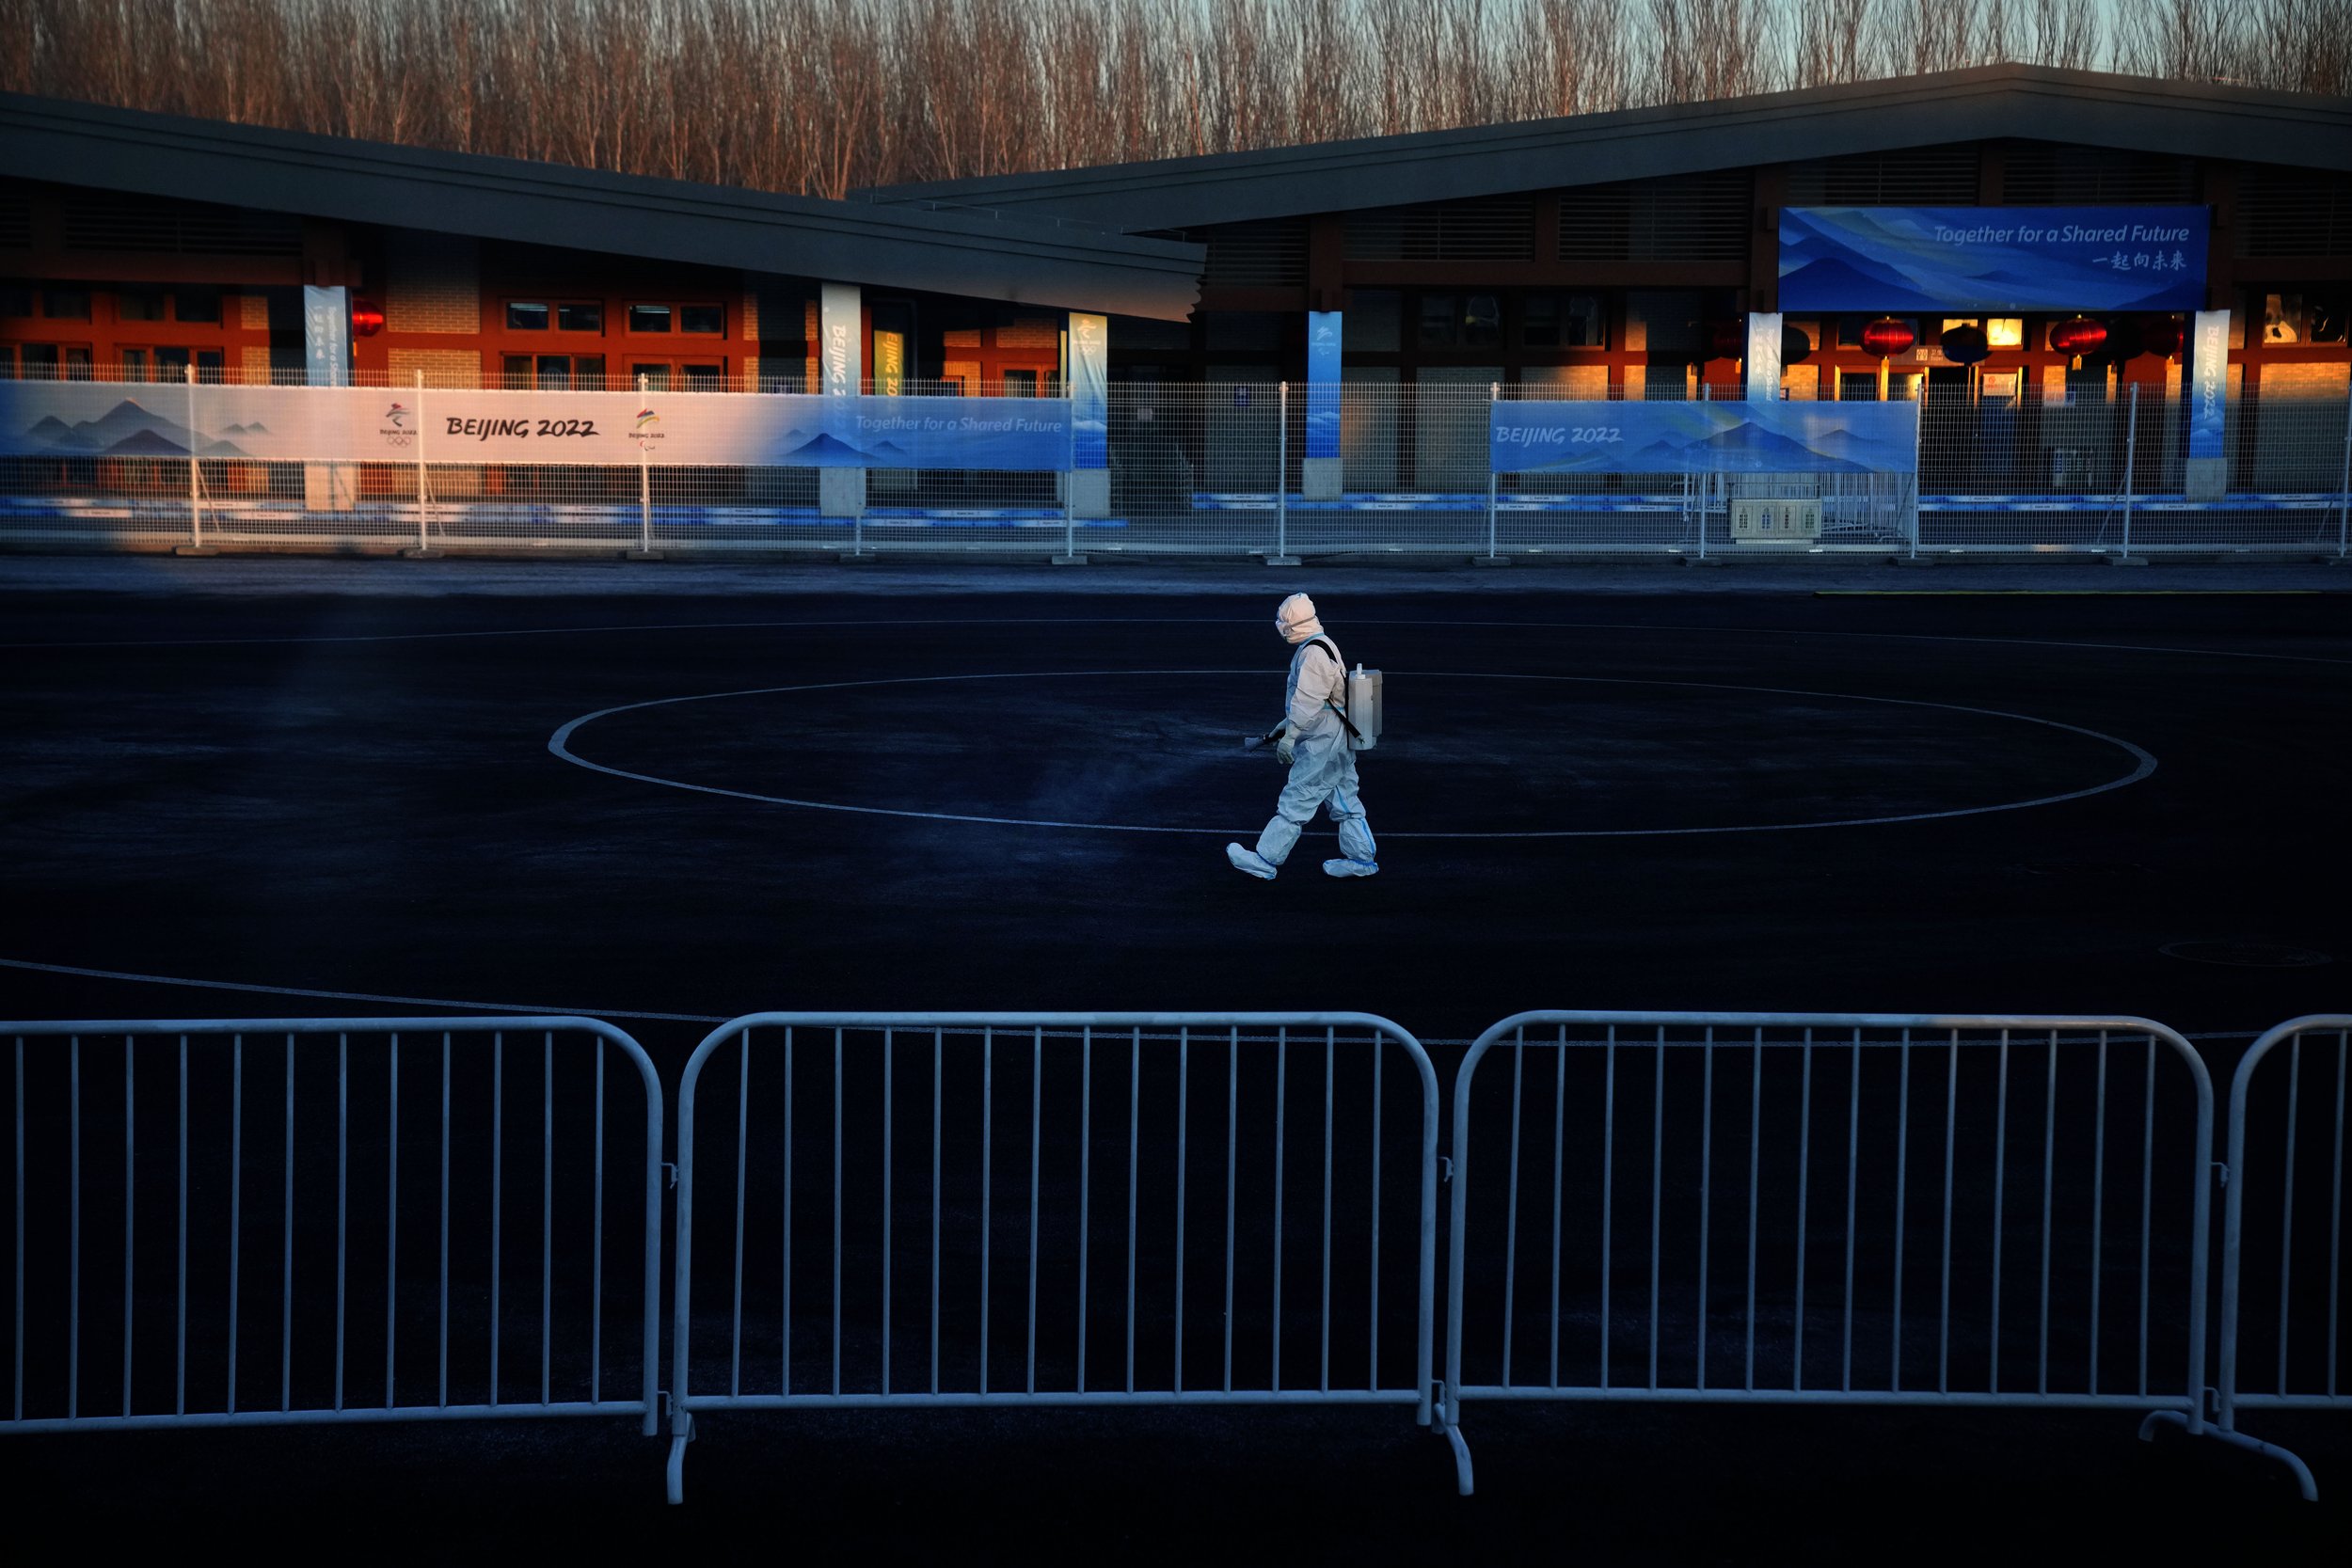  A worker wearing a protective suit sprays disinfectant at a screening checkpoint for arriving athletes at the 2022 Winter Olympics, Tuesday, Feb. 1, 2022, in the Yanqing district of Beijing. (AP Photo/Mark Schiefelbein) 